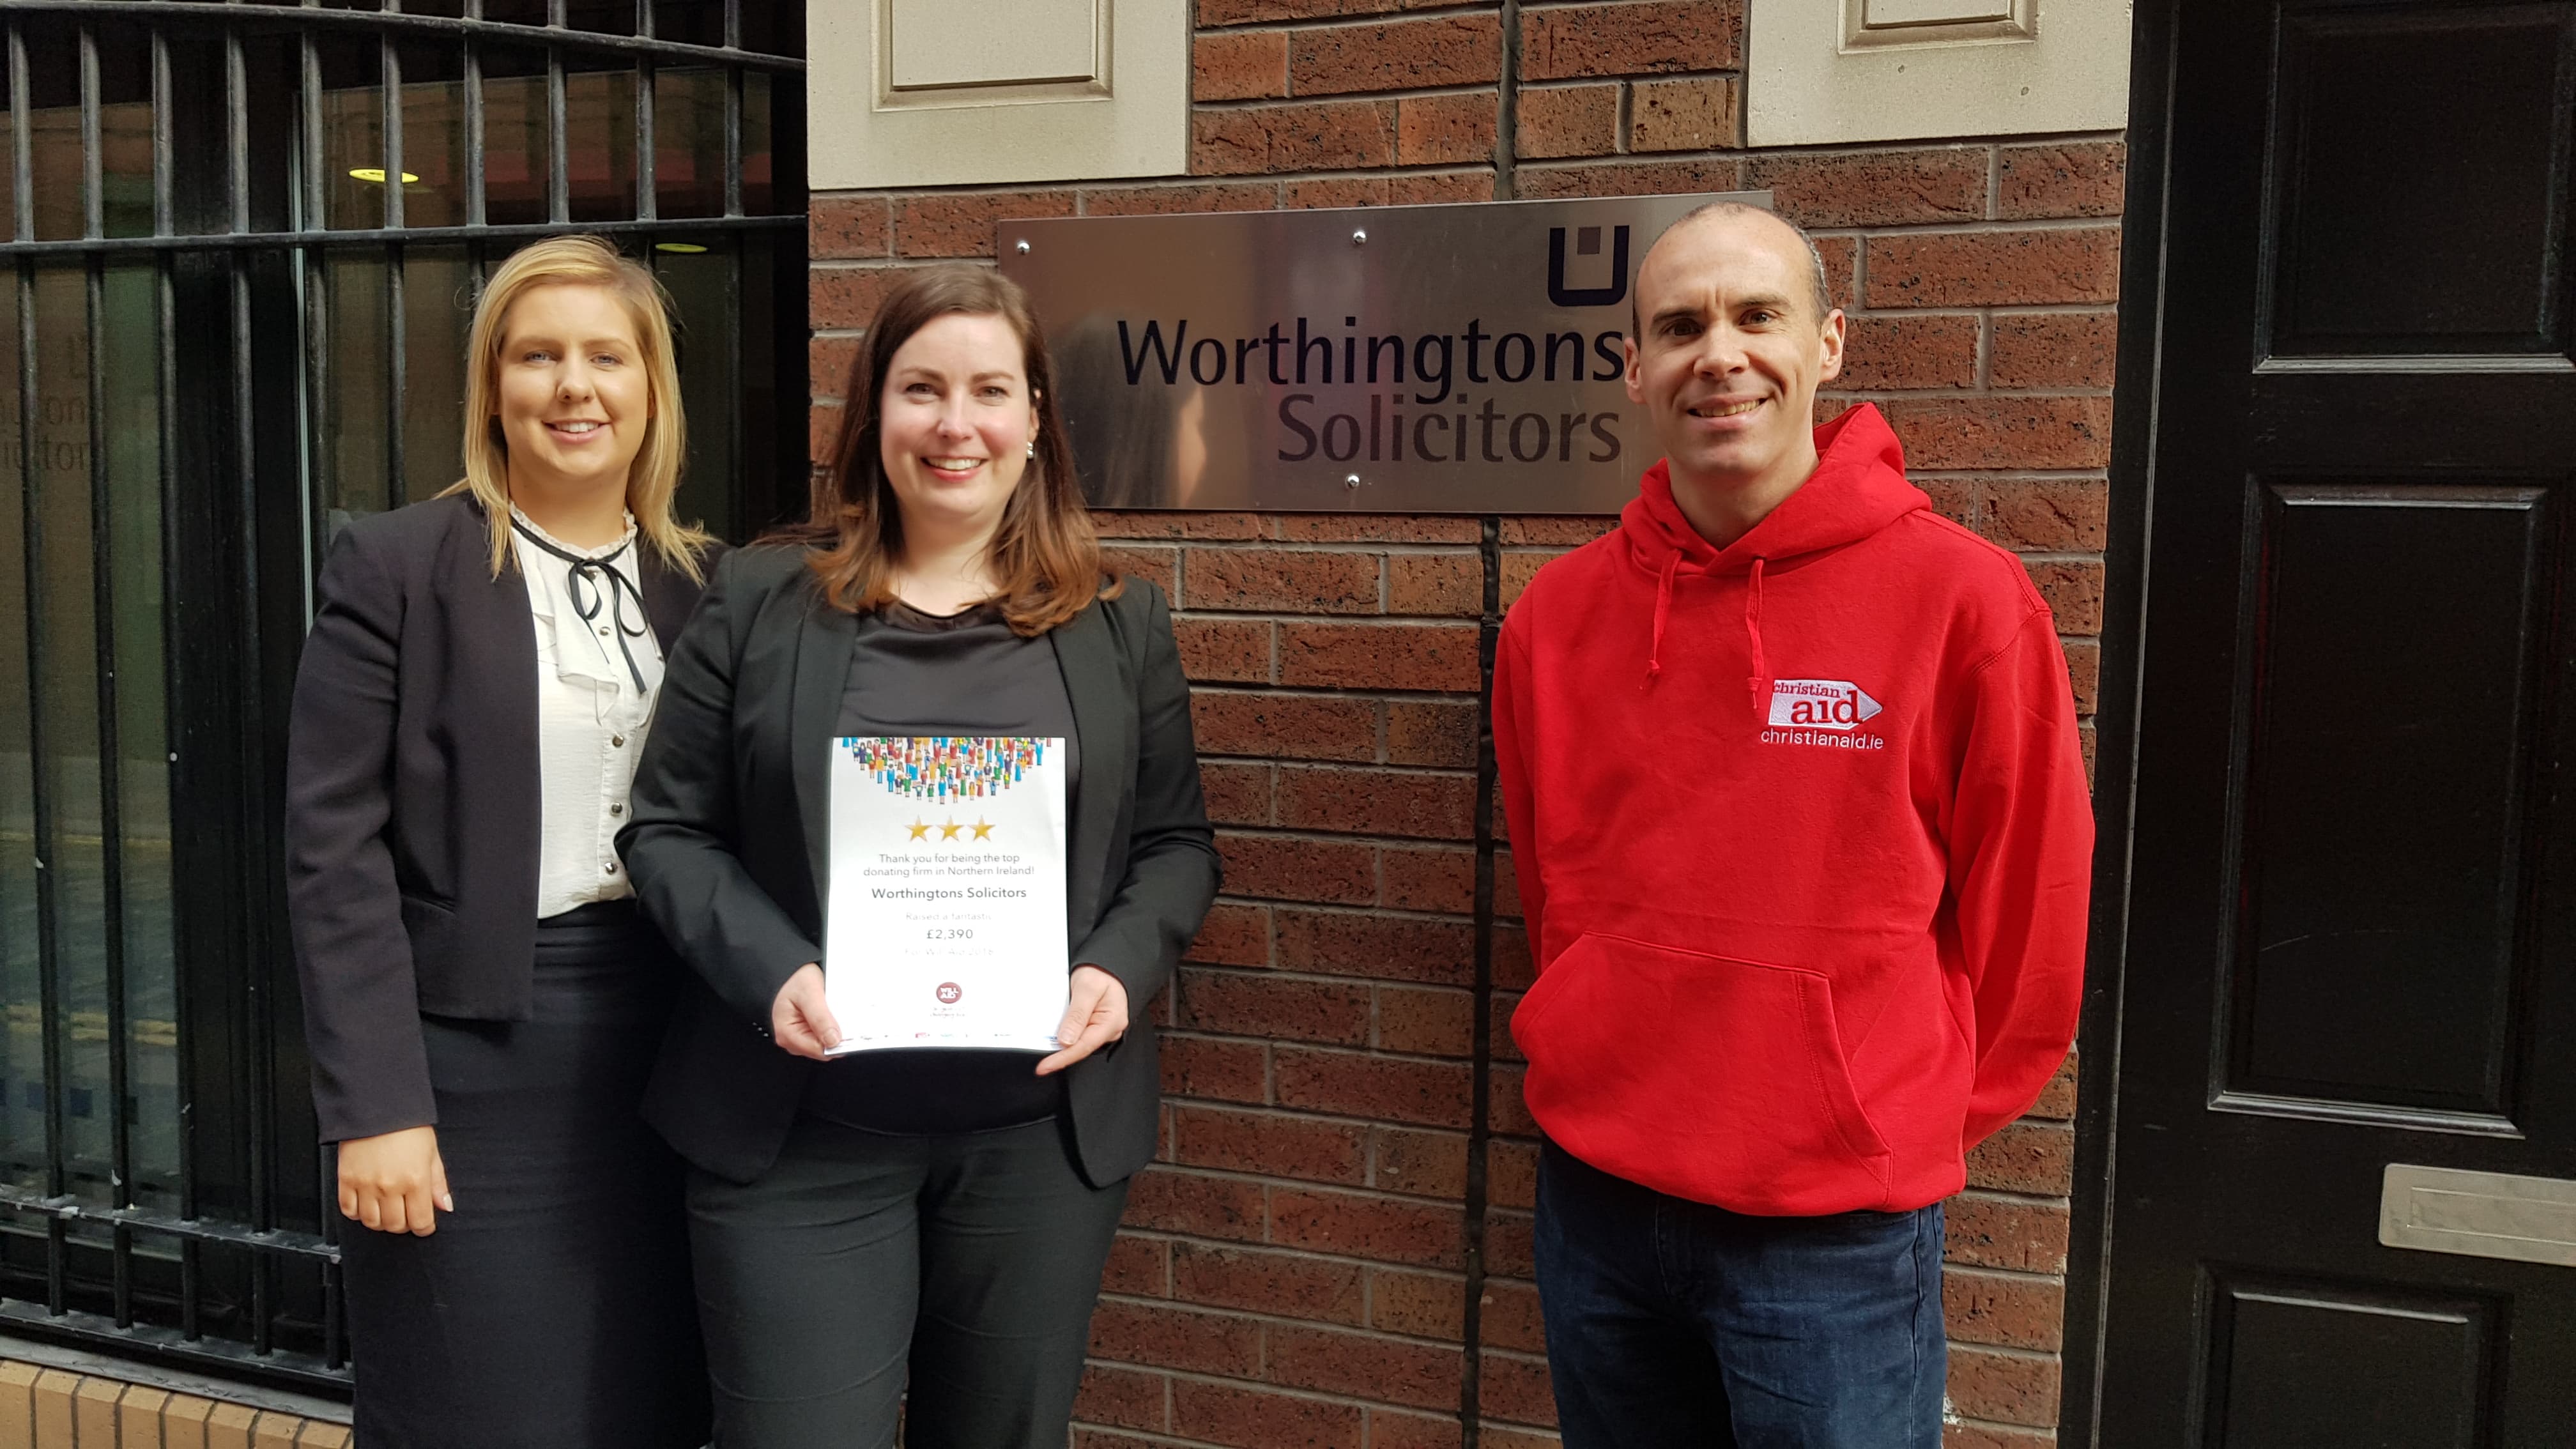  Worthington Solicitors Named As A Top Fundraiser For National Charity Campaign